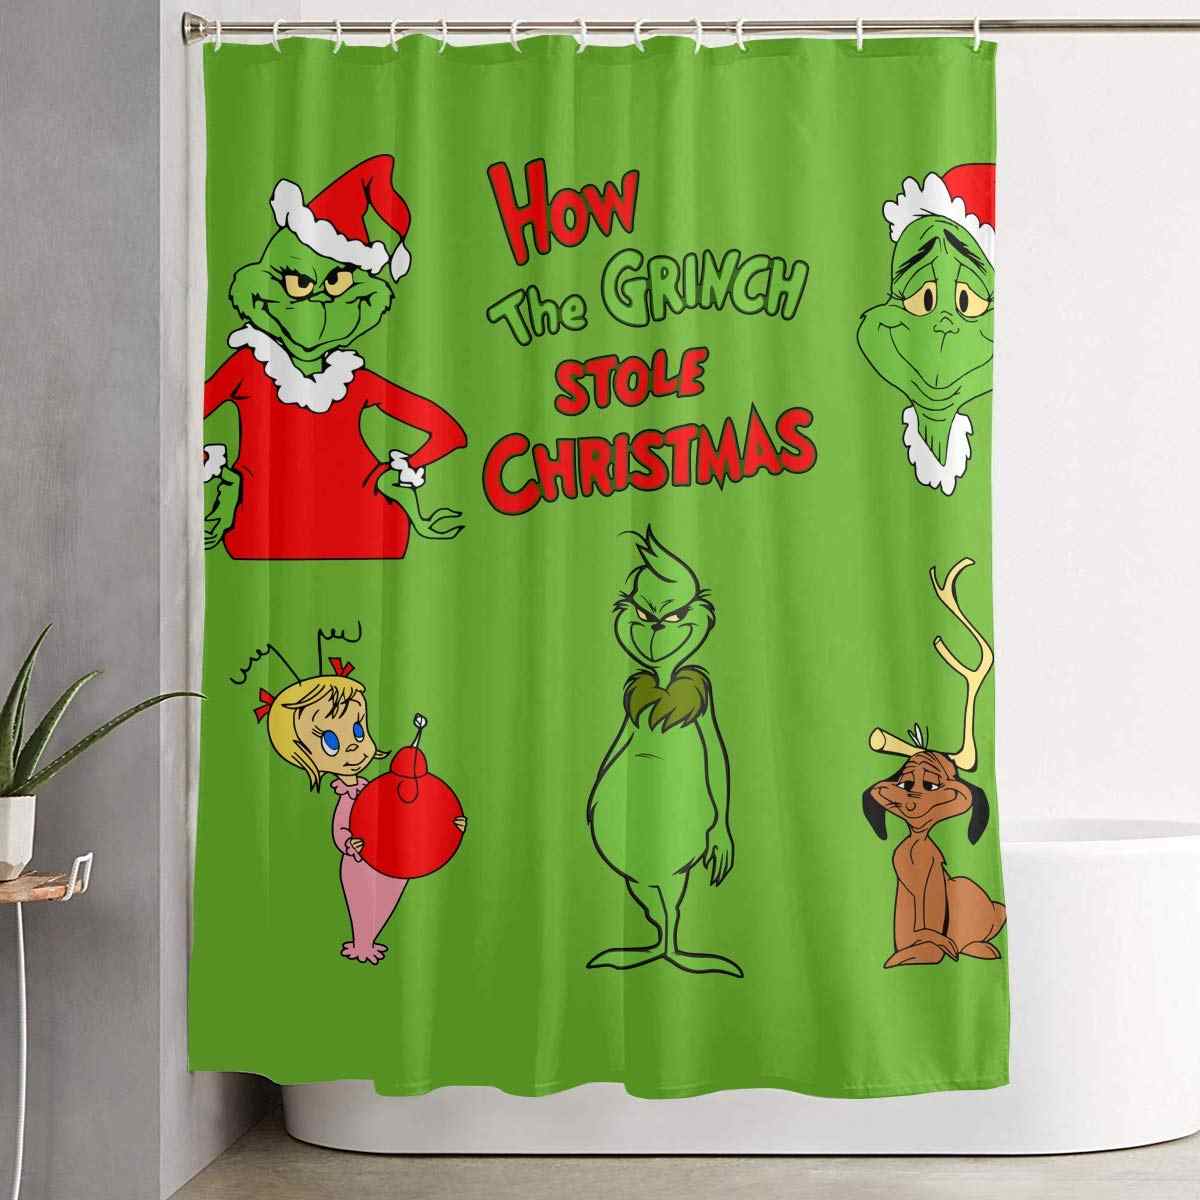 Mr Grinch Shower Curtain How The Grinch Stole Christmas Polyester